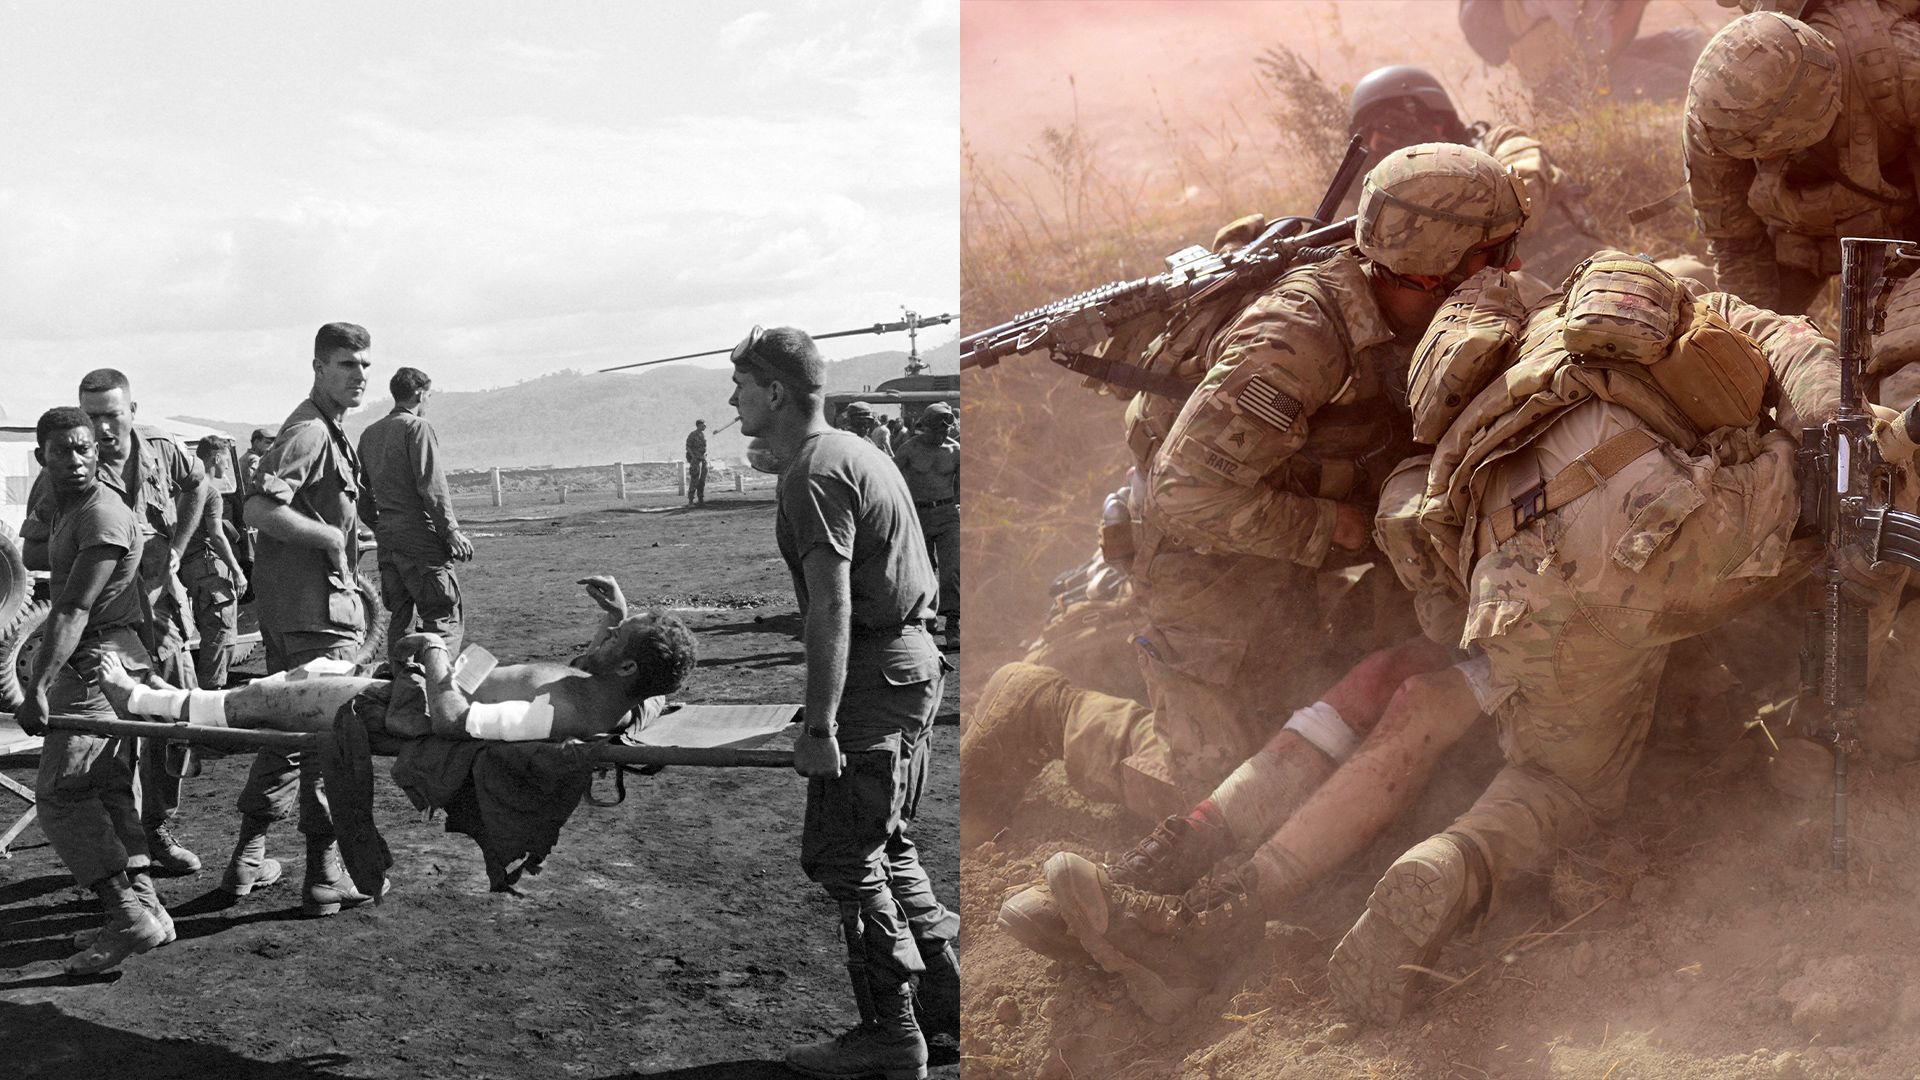 Side by side photos from the Vietnam and Afghanistan wars, showing injured soldiers being carried on stretchers. 